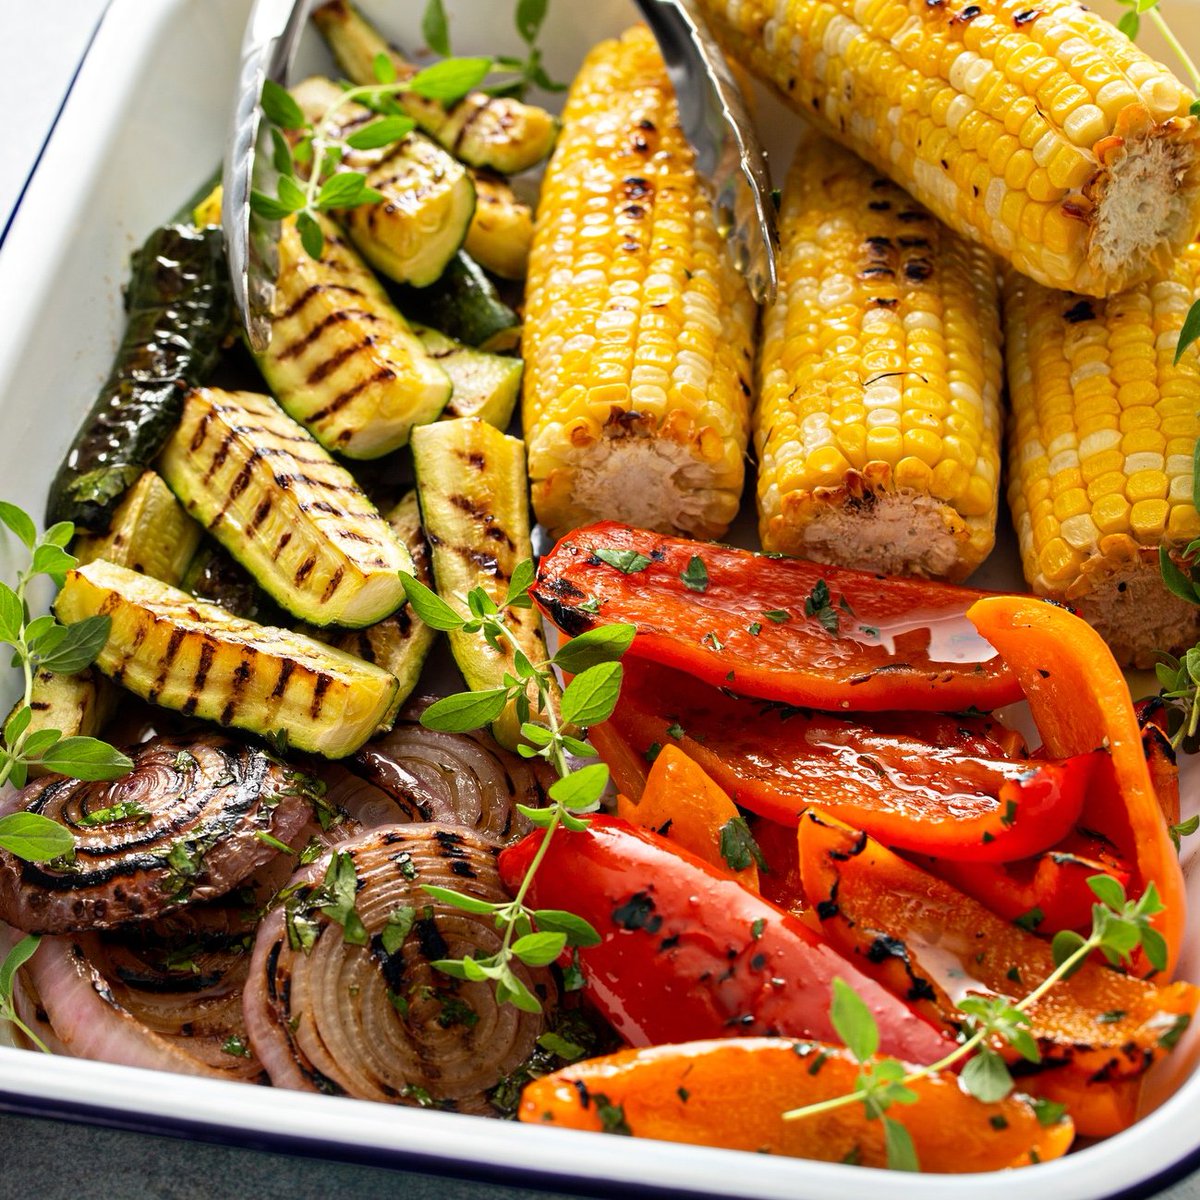 It looks like grilling season is here, and it's time to get those veggies on the grill! Grilled vegetables are a must-know technique. Check out our tips and tricks.☀️ kowalskis.com/recipes/side-d…